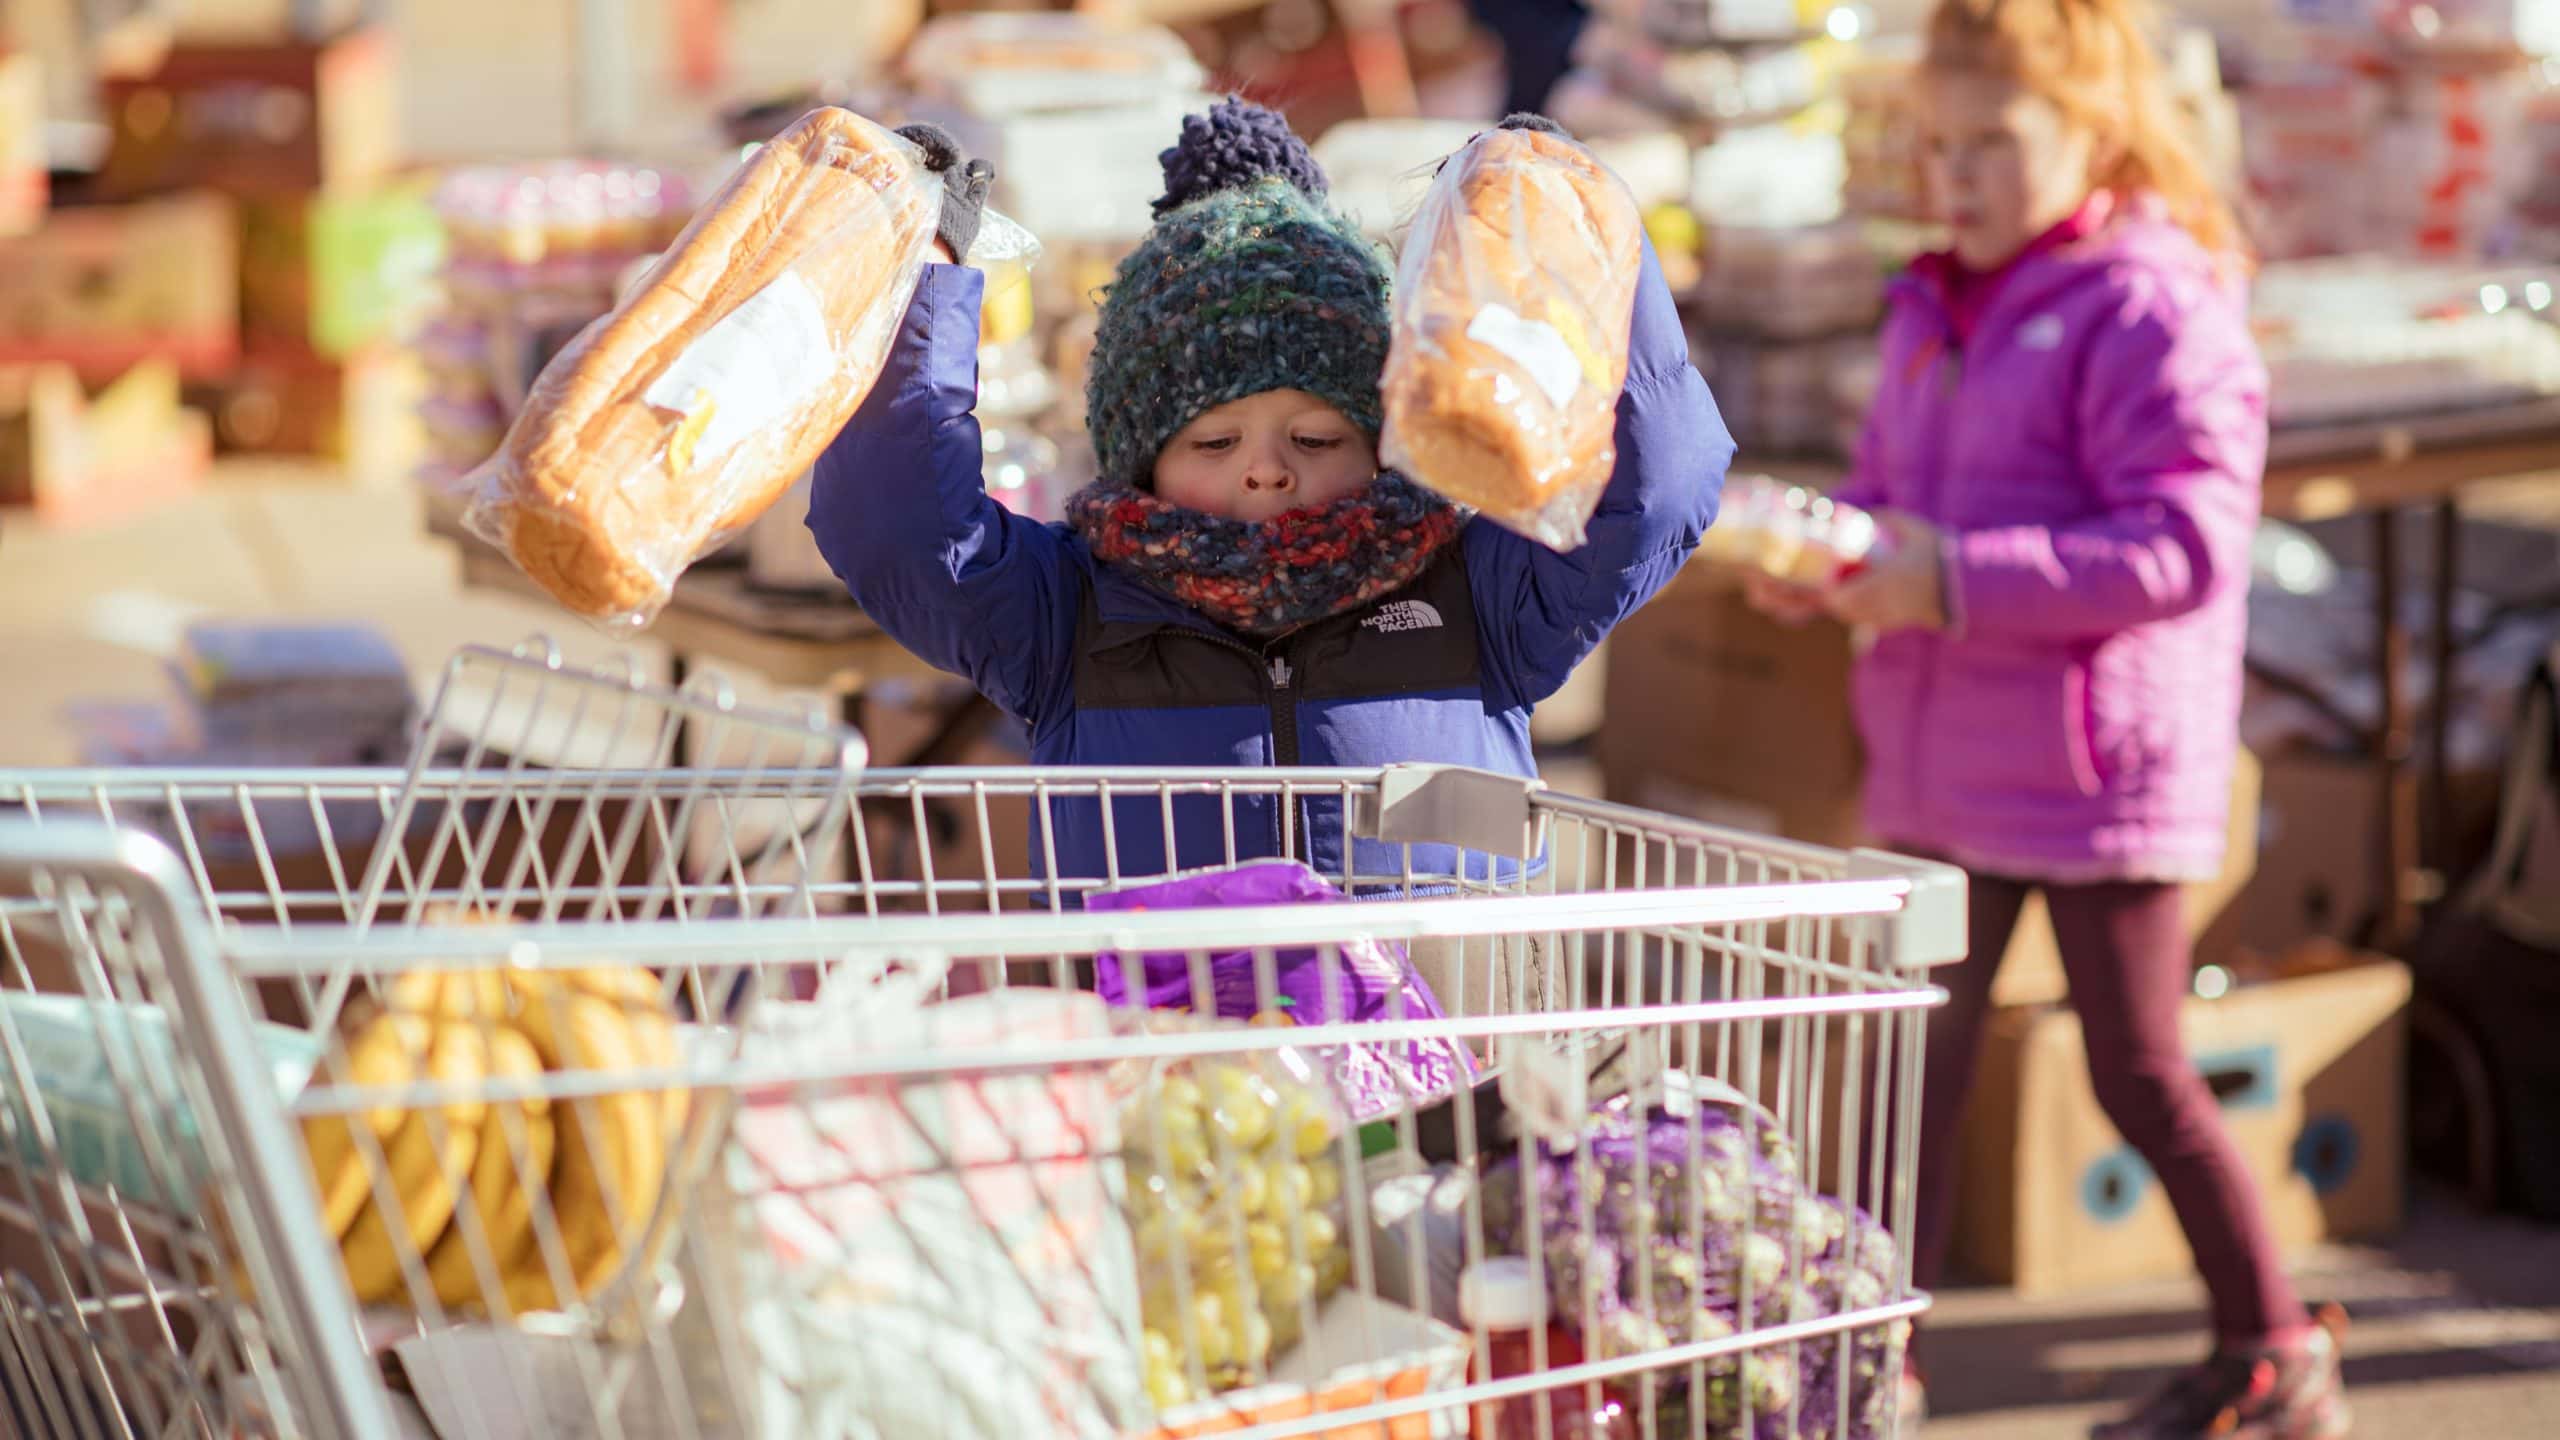 A young volunteer puts bread into a shopping cart at a One Generation Away mobile food pantry distribution in Ashland City Tennessee. Photo credit goes to Kris Orlowski.